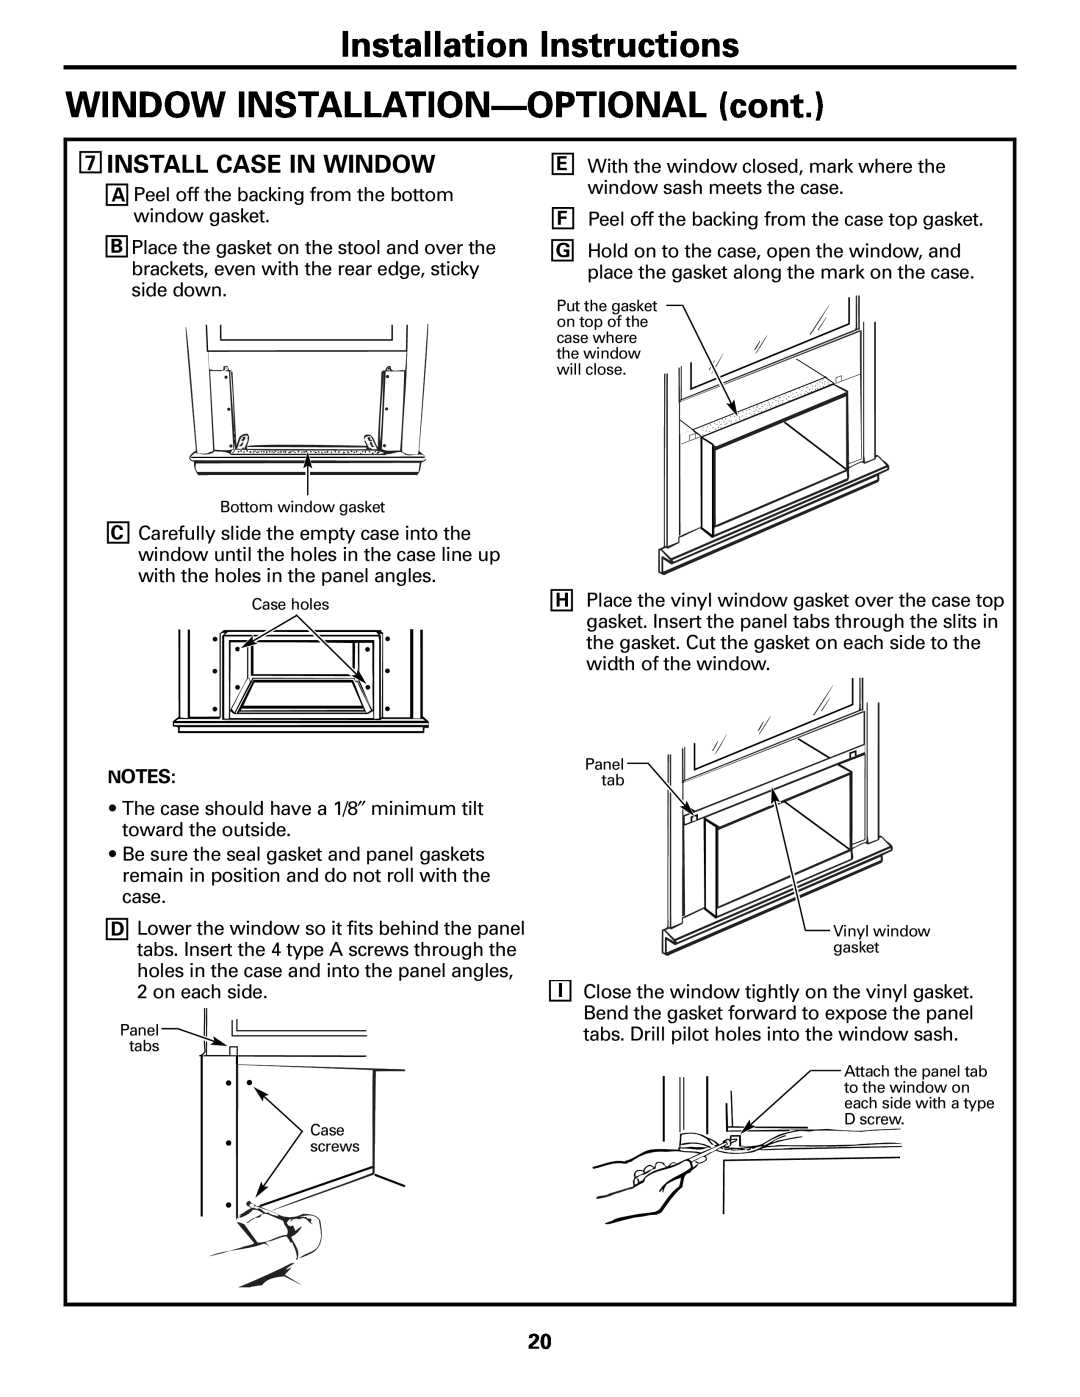 GE Cool Only installation instructions 7INSTALL CASE IN WINDOW, Installation Instructions, WINDOW INSTALLATION—OPTIONALcont 